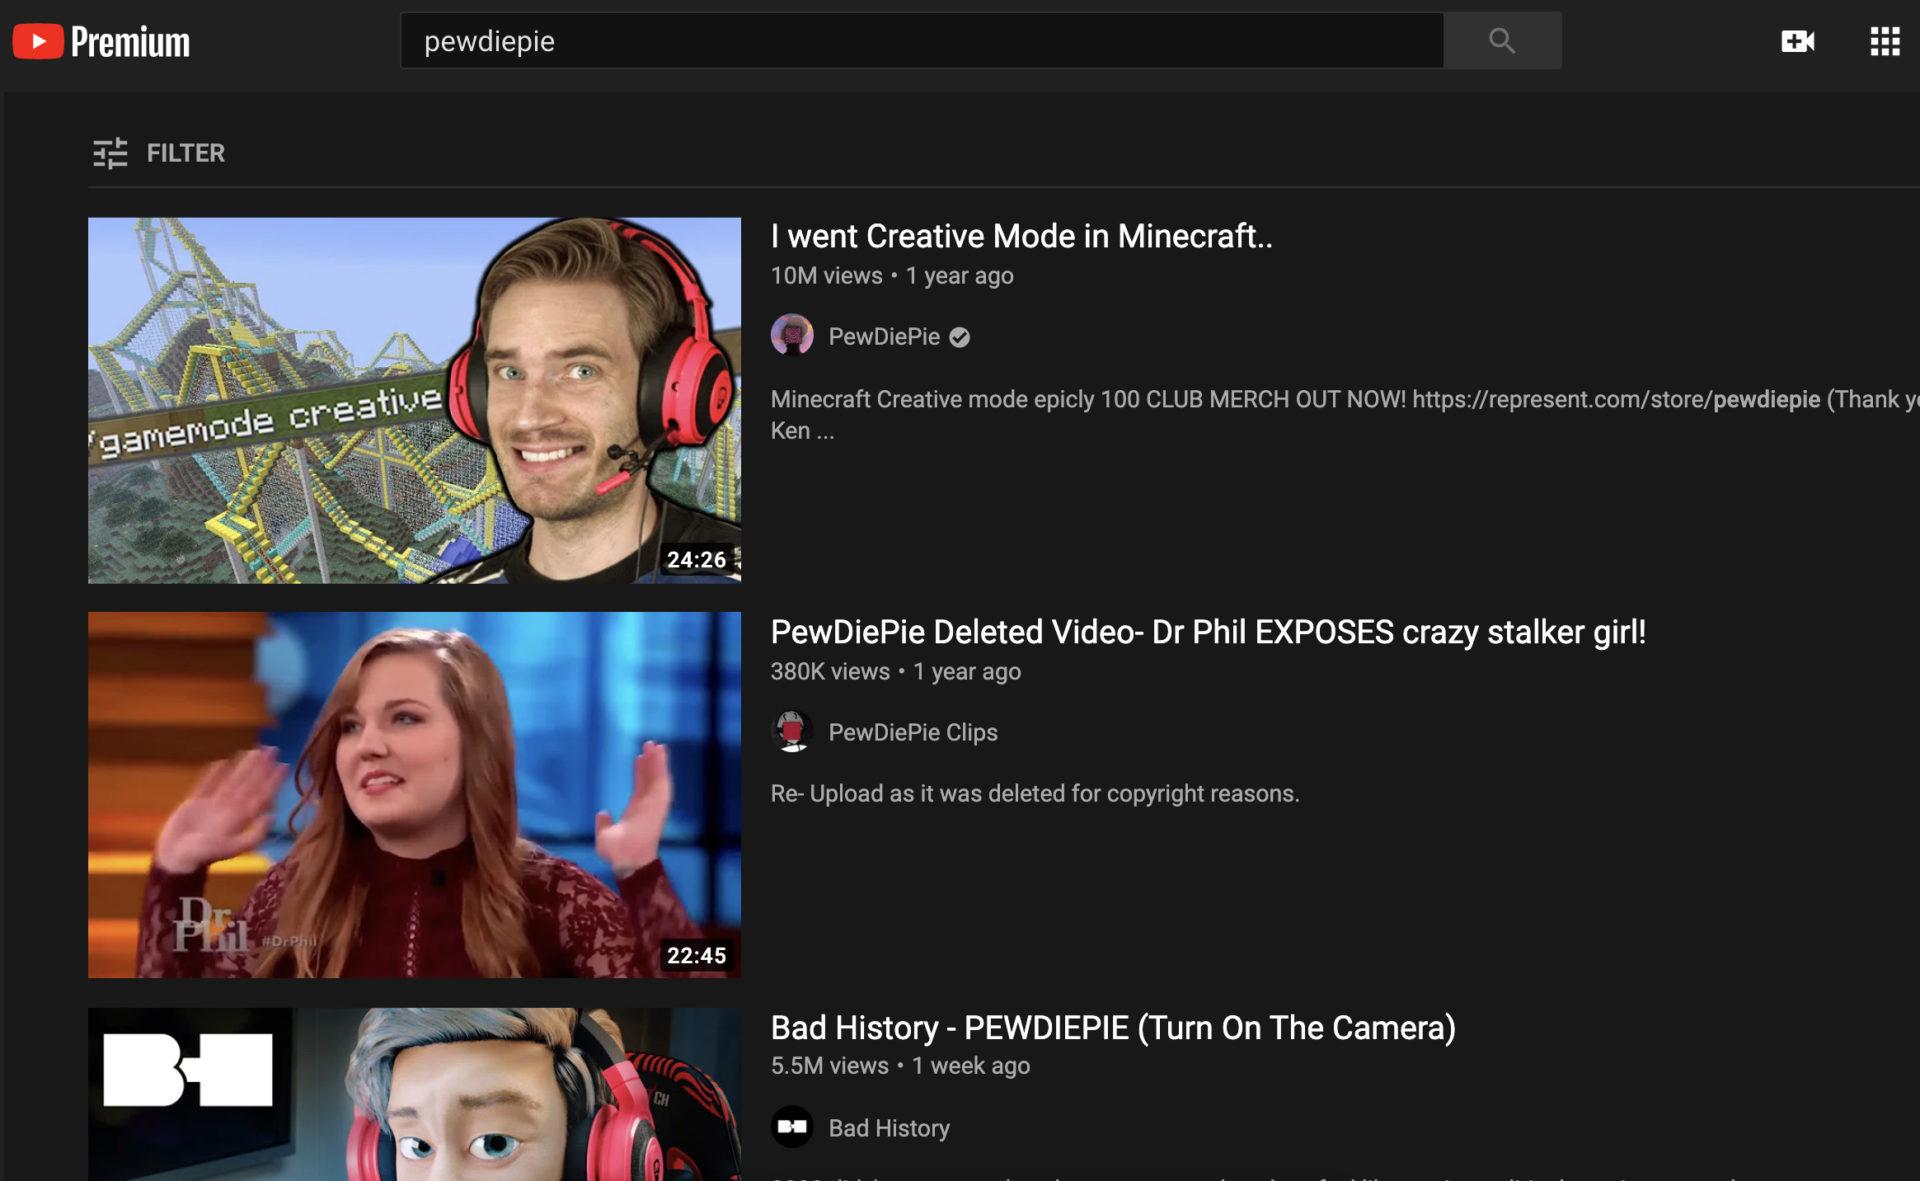 YouTube search results for PewDiePie's channel.